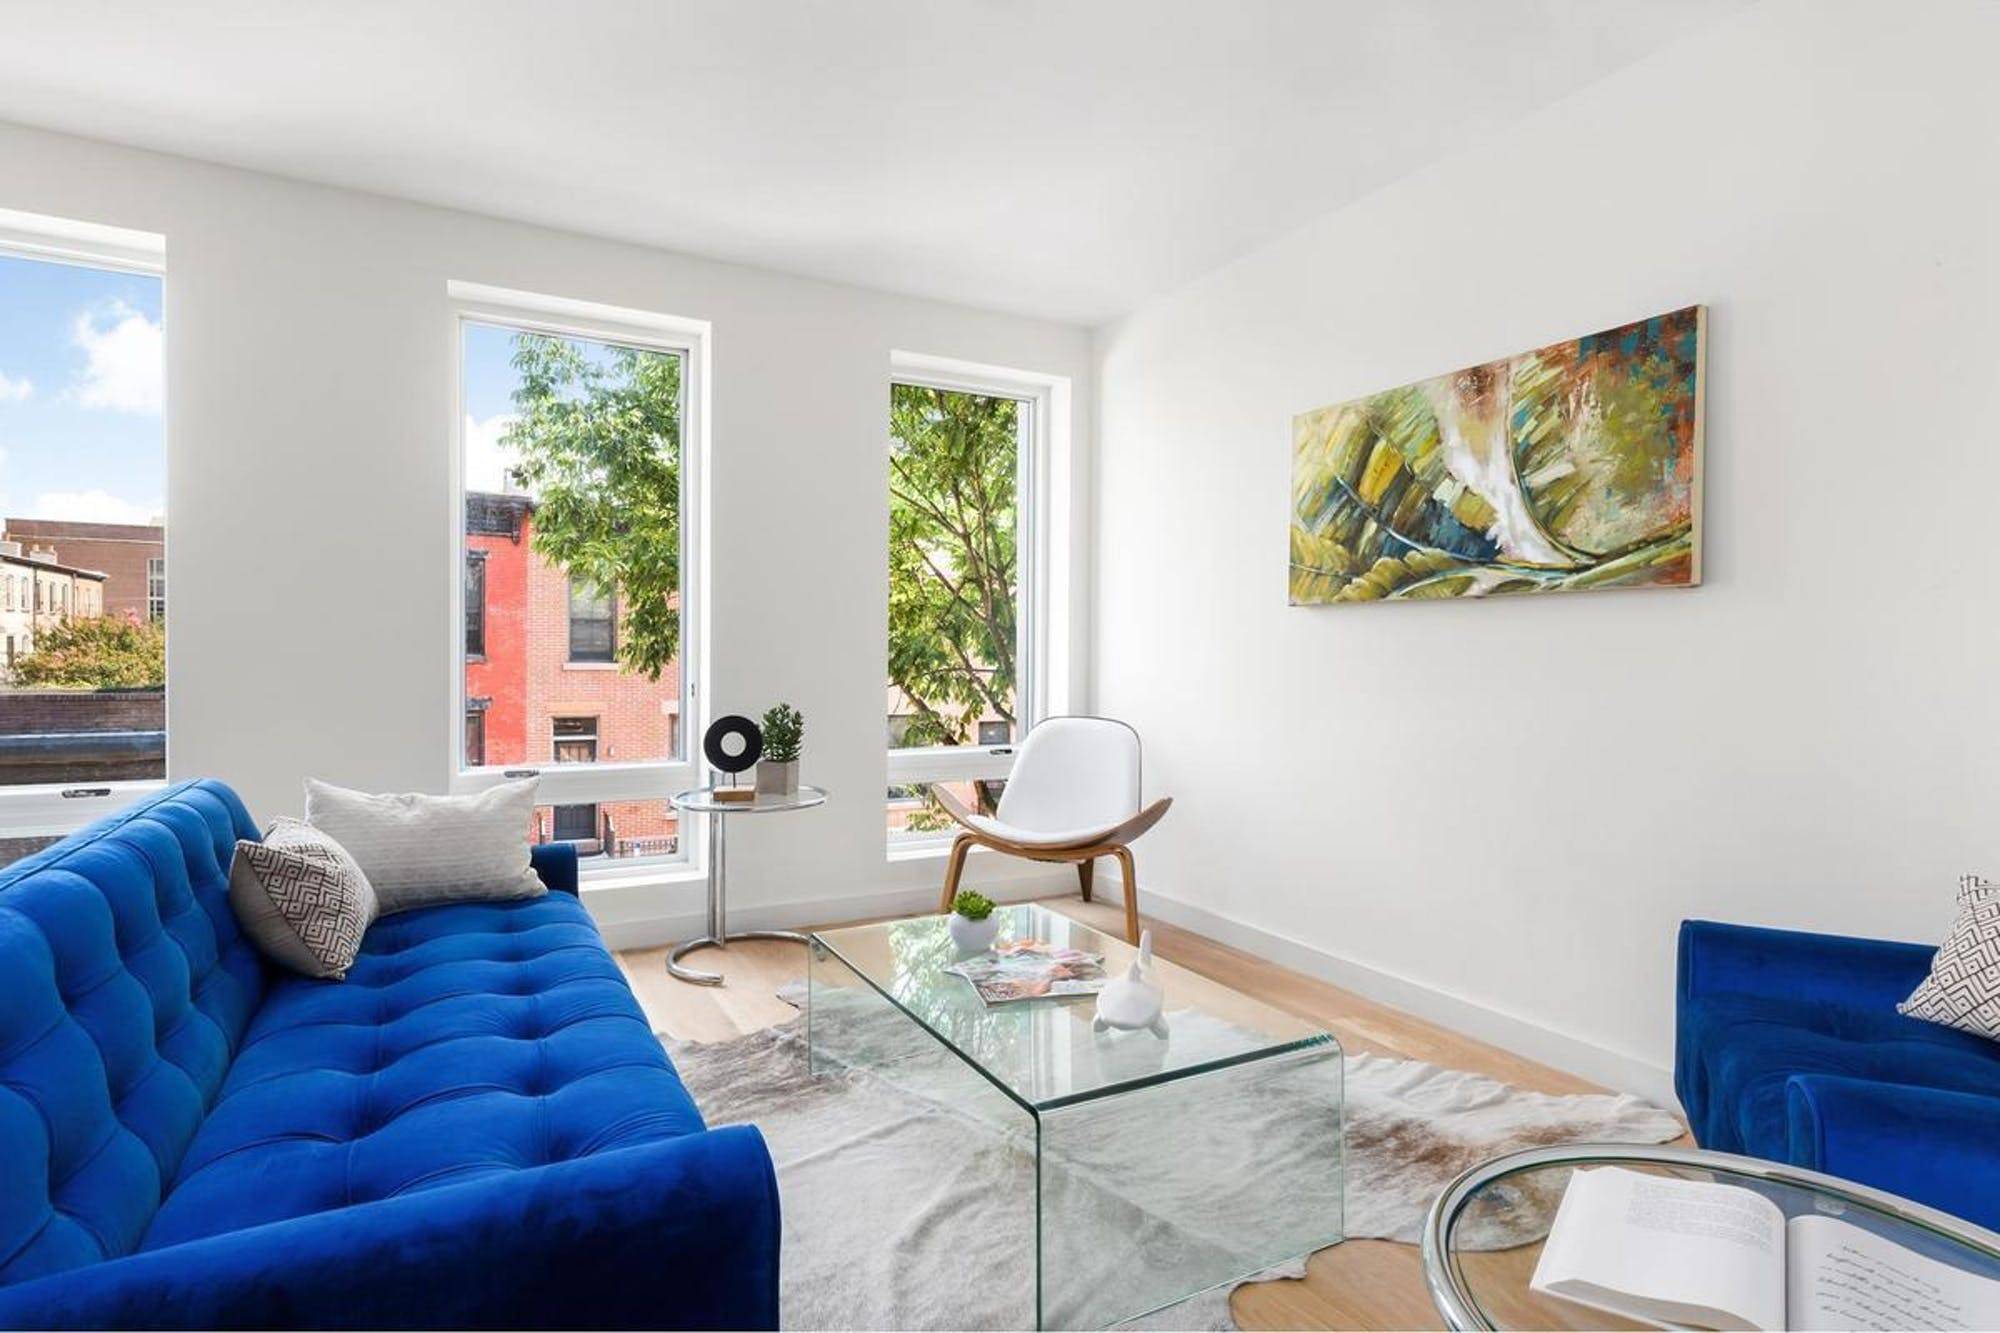 316 Carroll Street brings an exceptional collection of three new luxury duplex condominium residences to one of the most desirable locations in Brooklyn's bustling and stylish Carroll Gardens each with ...